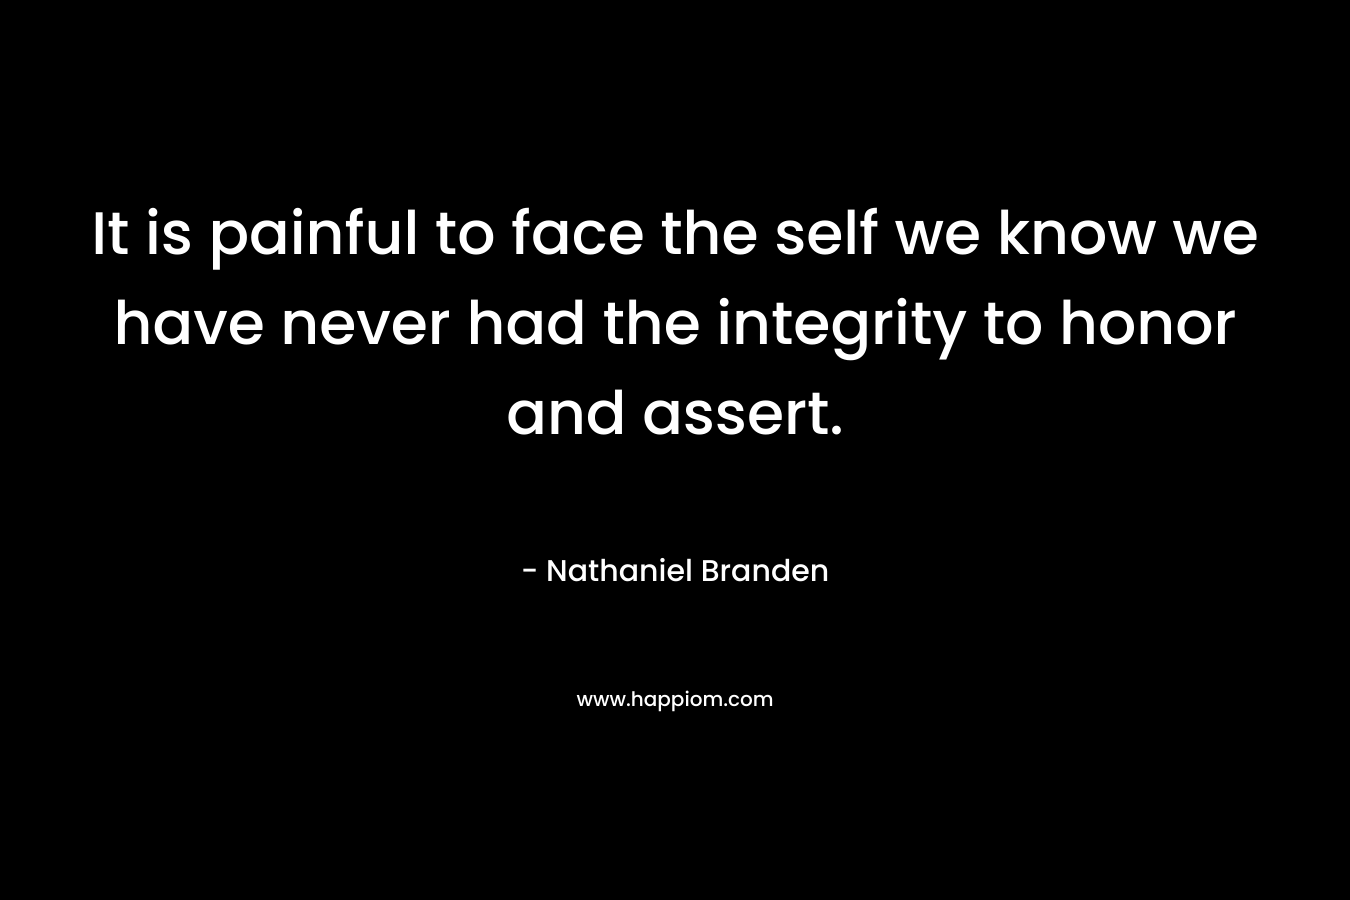 It is painful to face the self we know we have never had the integrity to honor and assert.